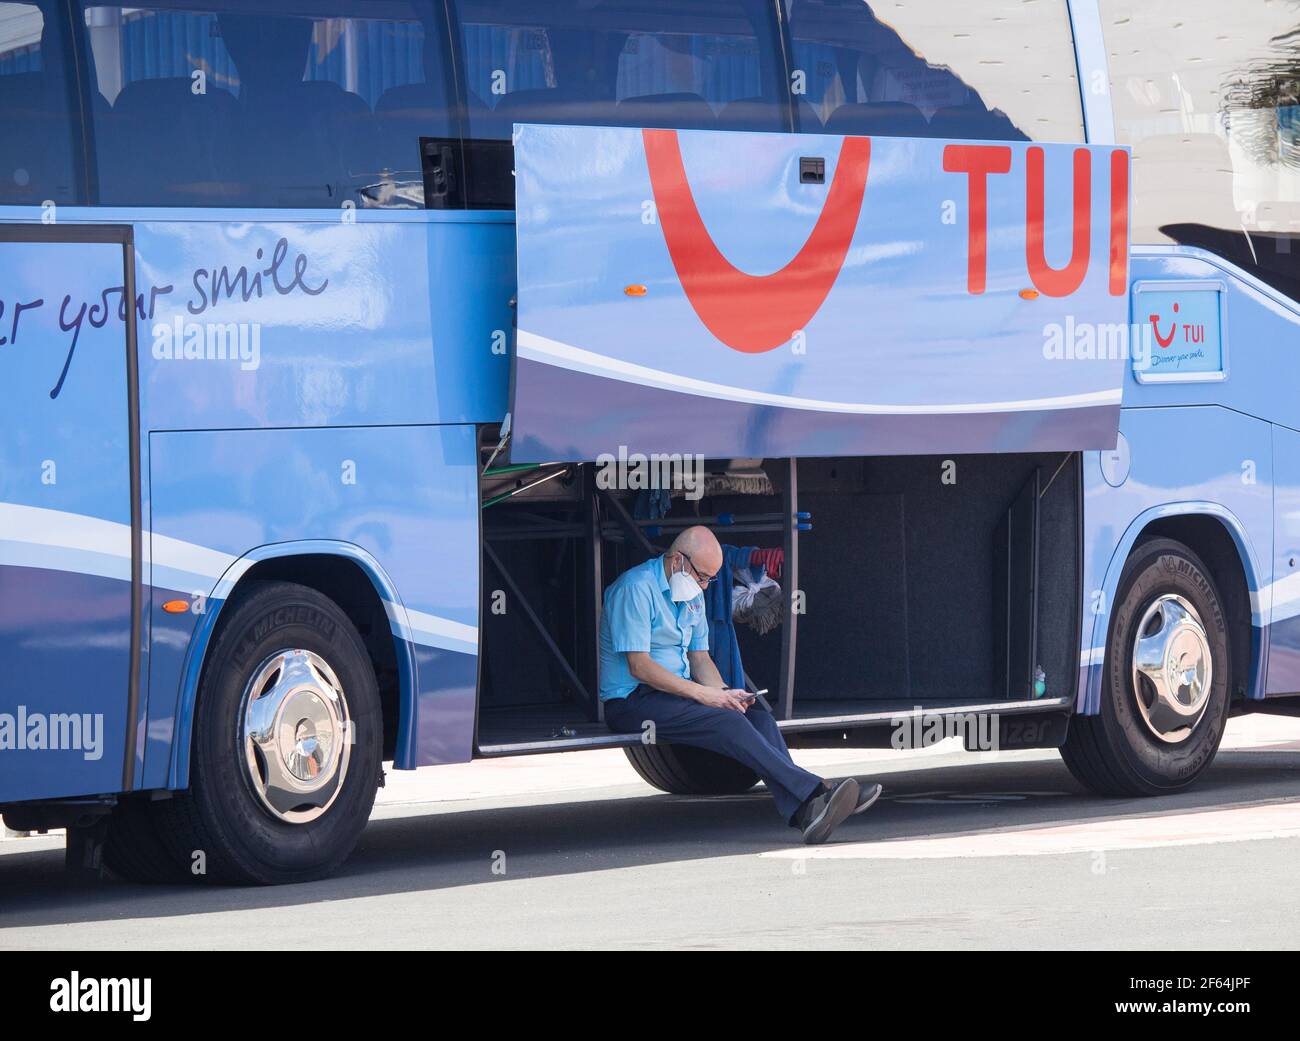 Tui coach, bus driver wearing face mask, covering in Spain Stock Photo